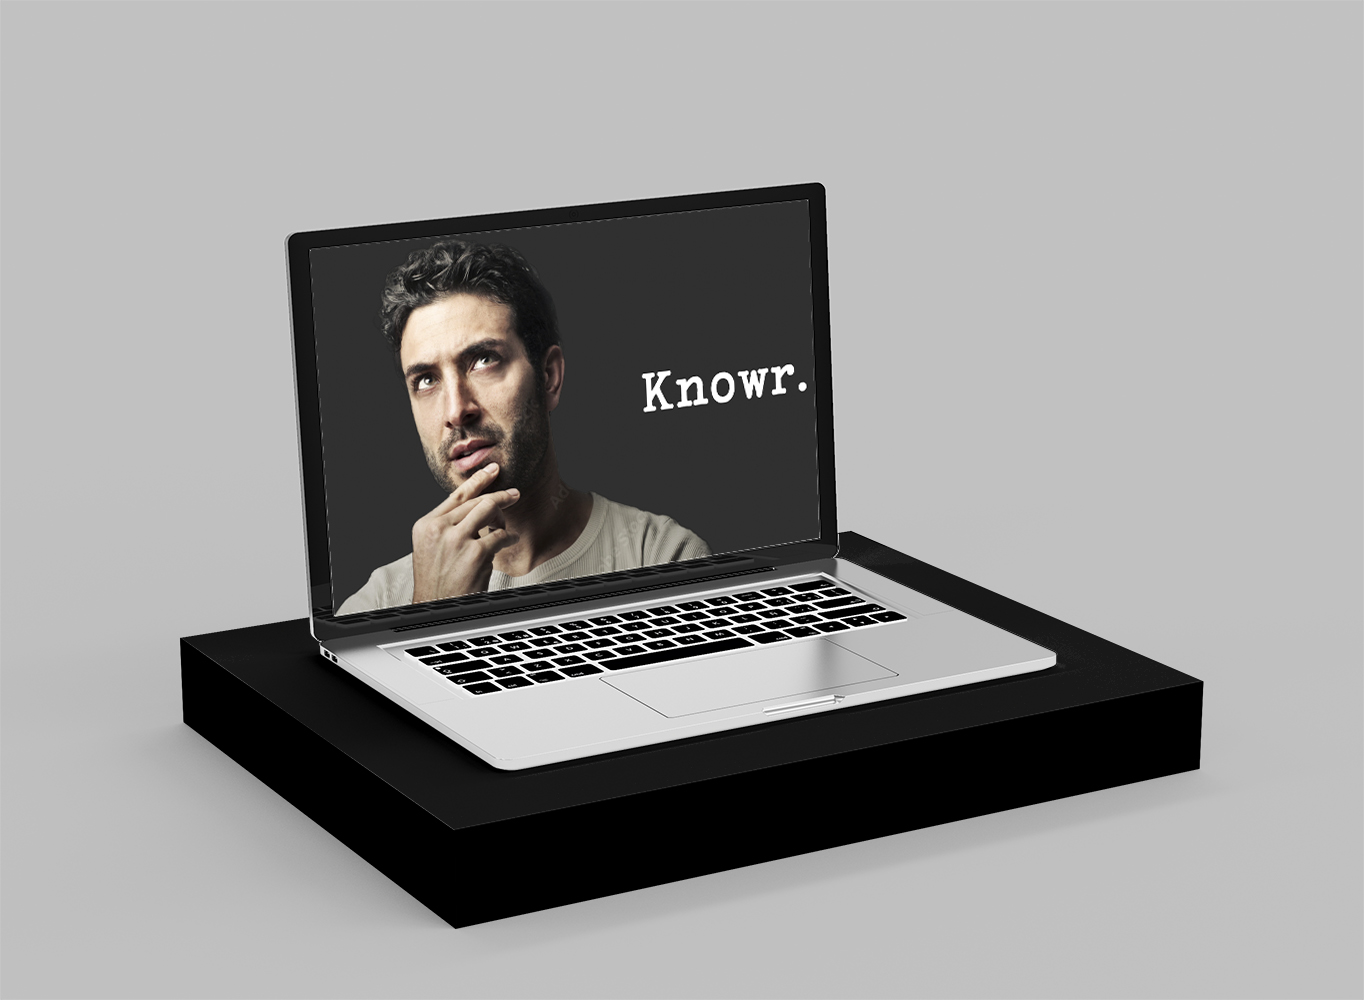 Laptop on stand showing software named Knowr and picture of man thinking.